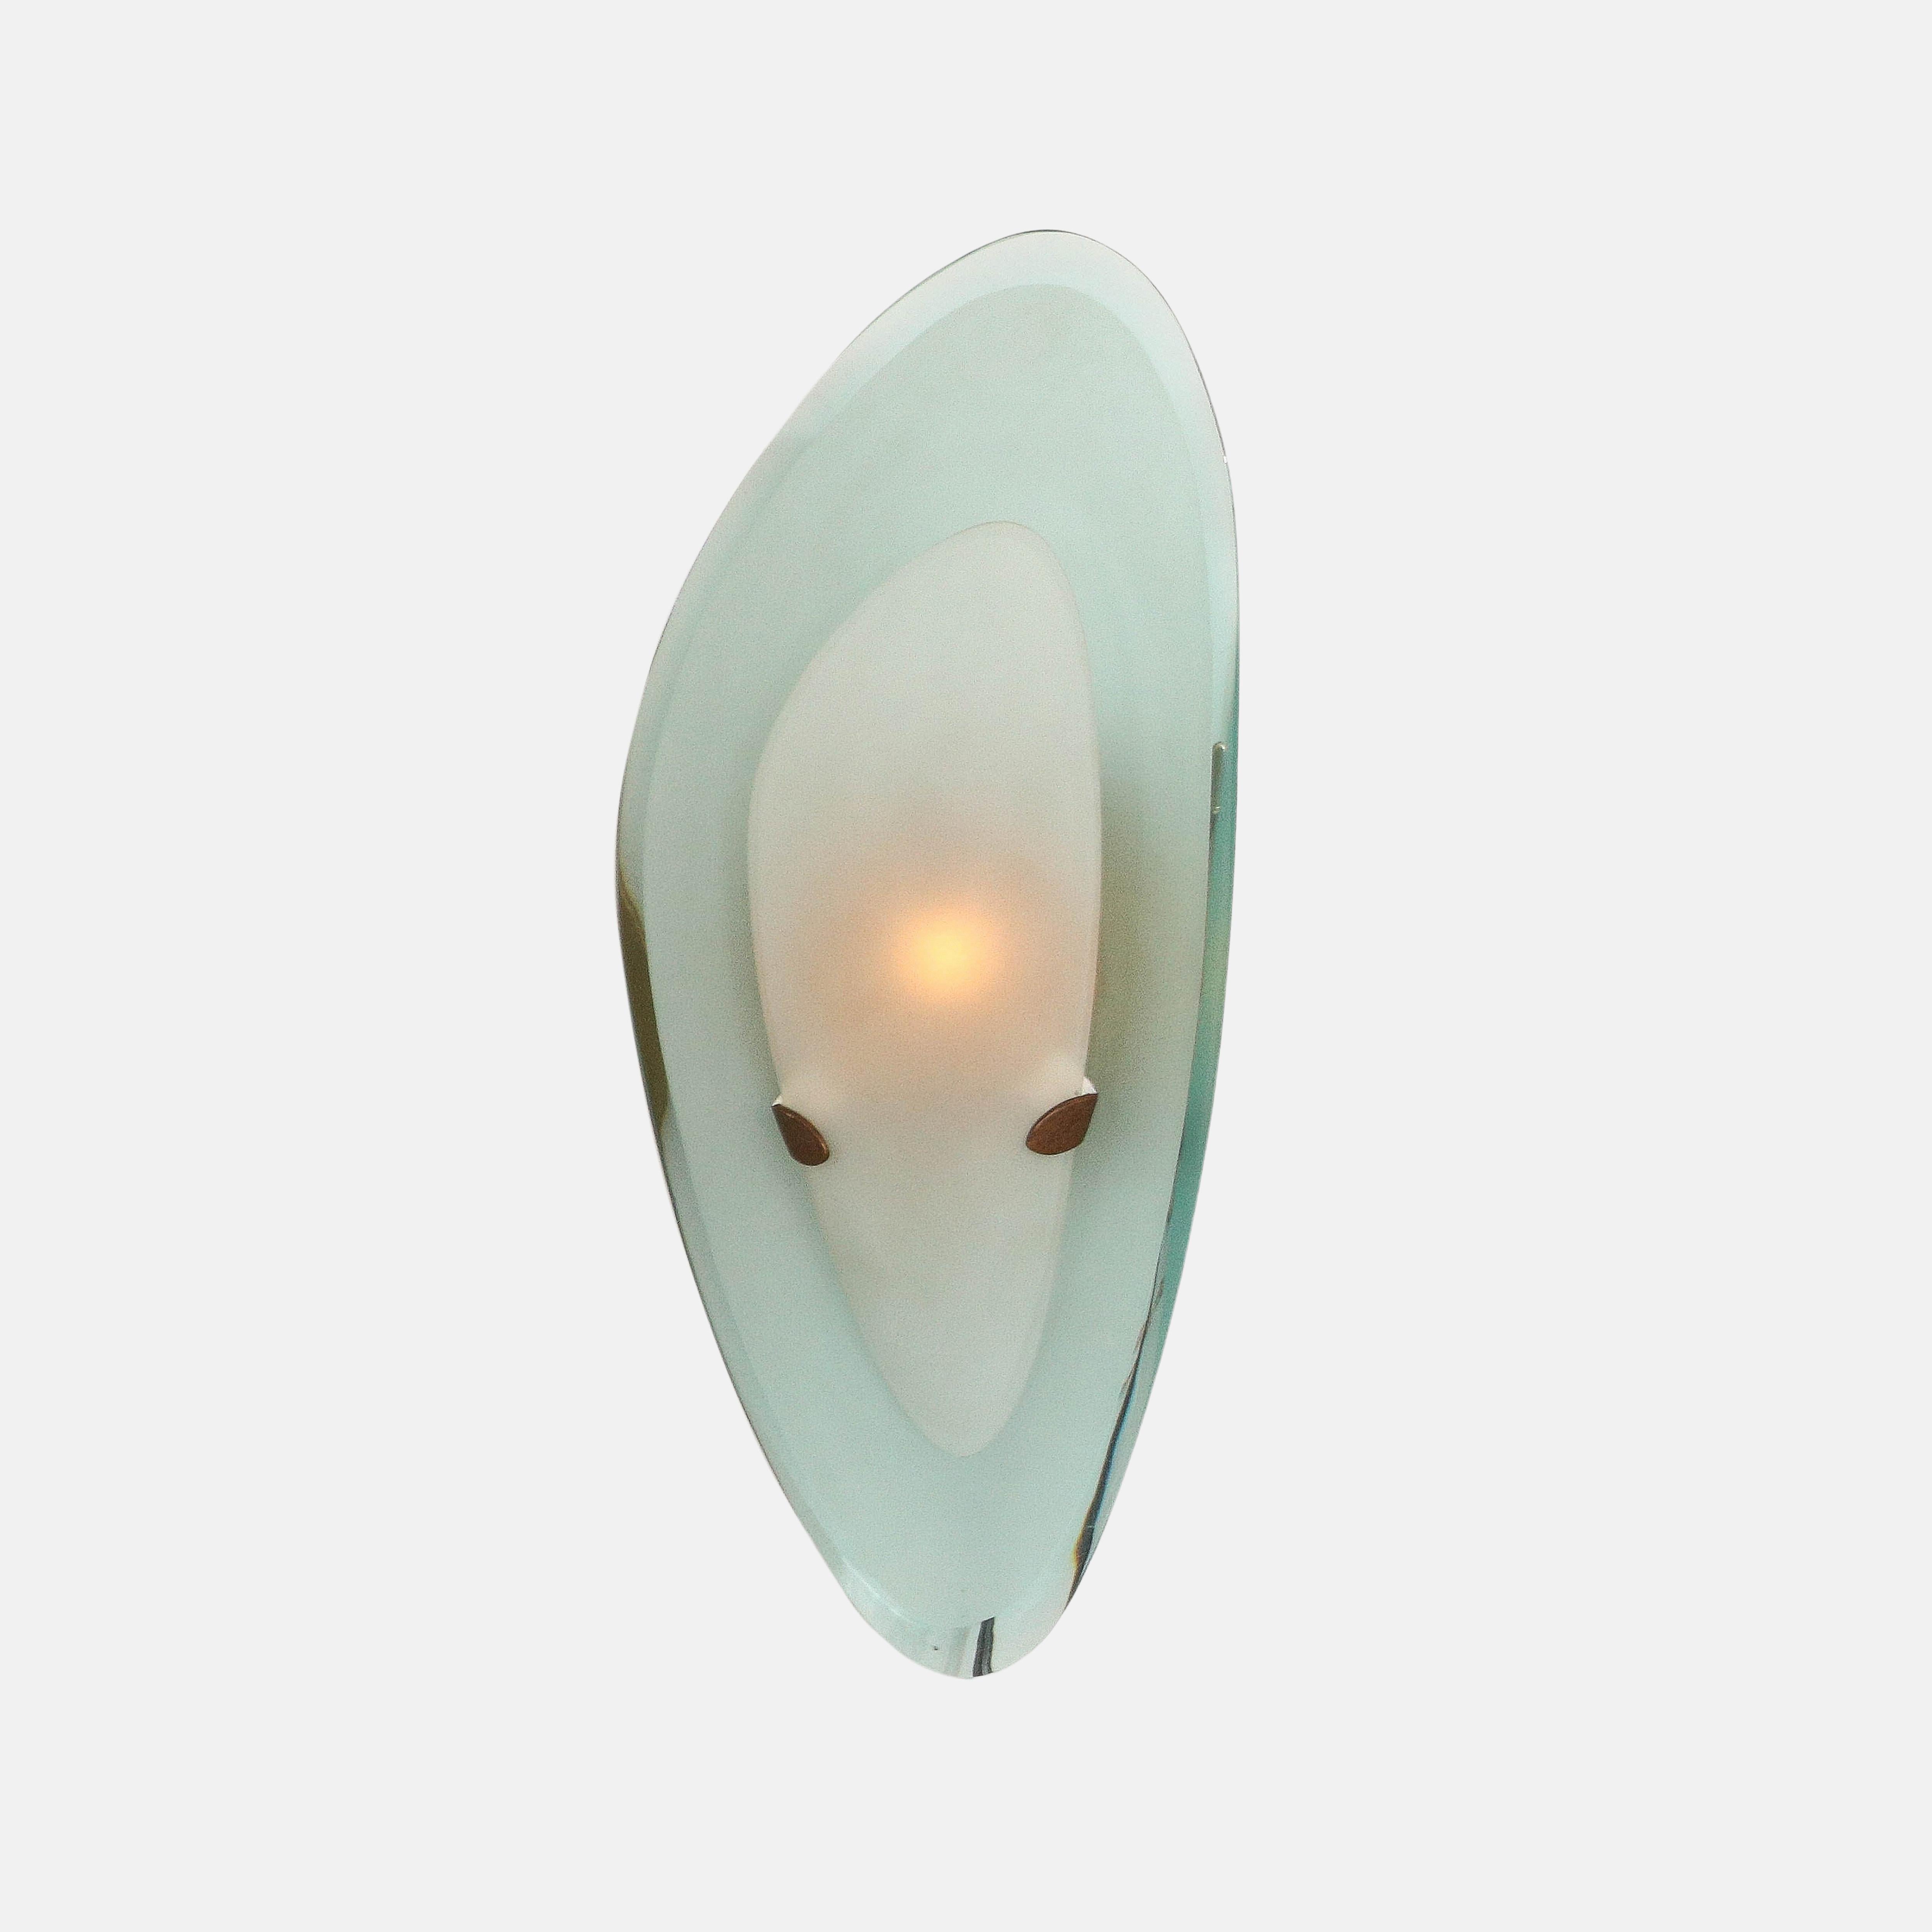 Max Ingrand for Fontana Arte rare exquisite pair of sconces consisting of colored curved and beveled ground glass and smaller curved satin or acid-etched glass shades suspended by brass brackets which are attached to round cylindrical brass